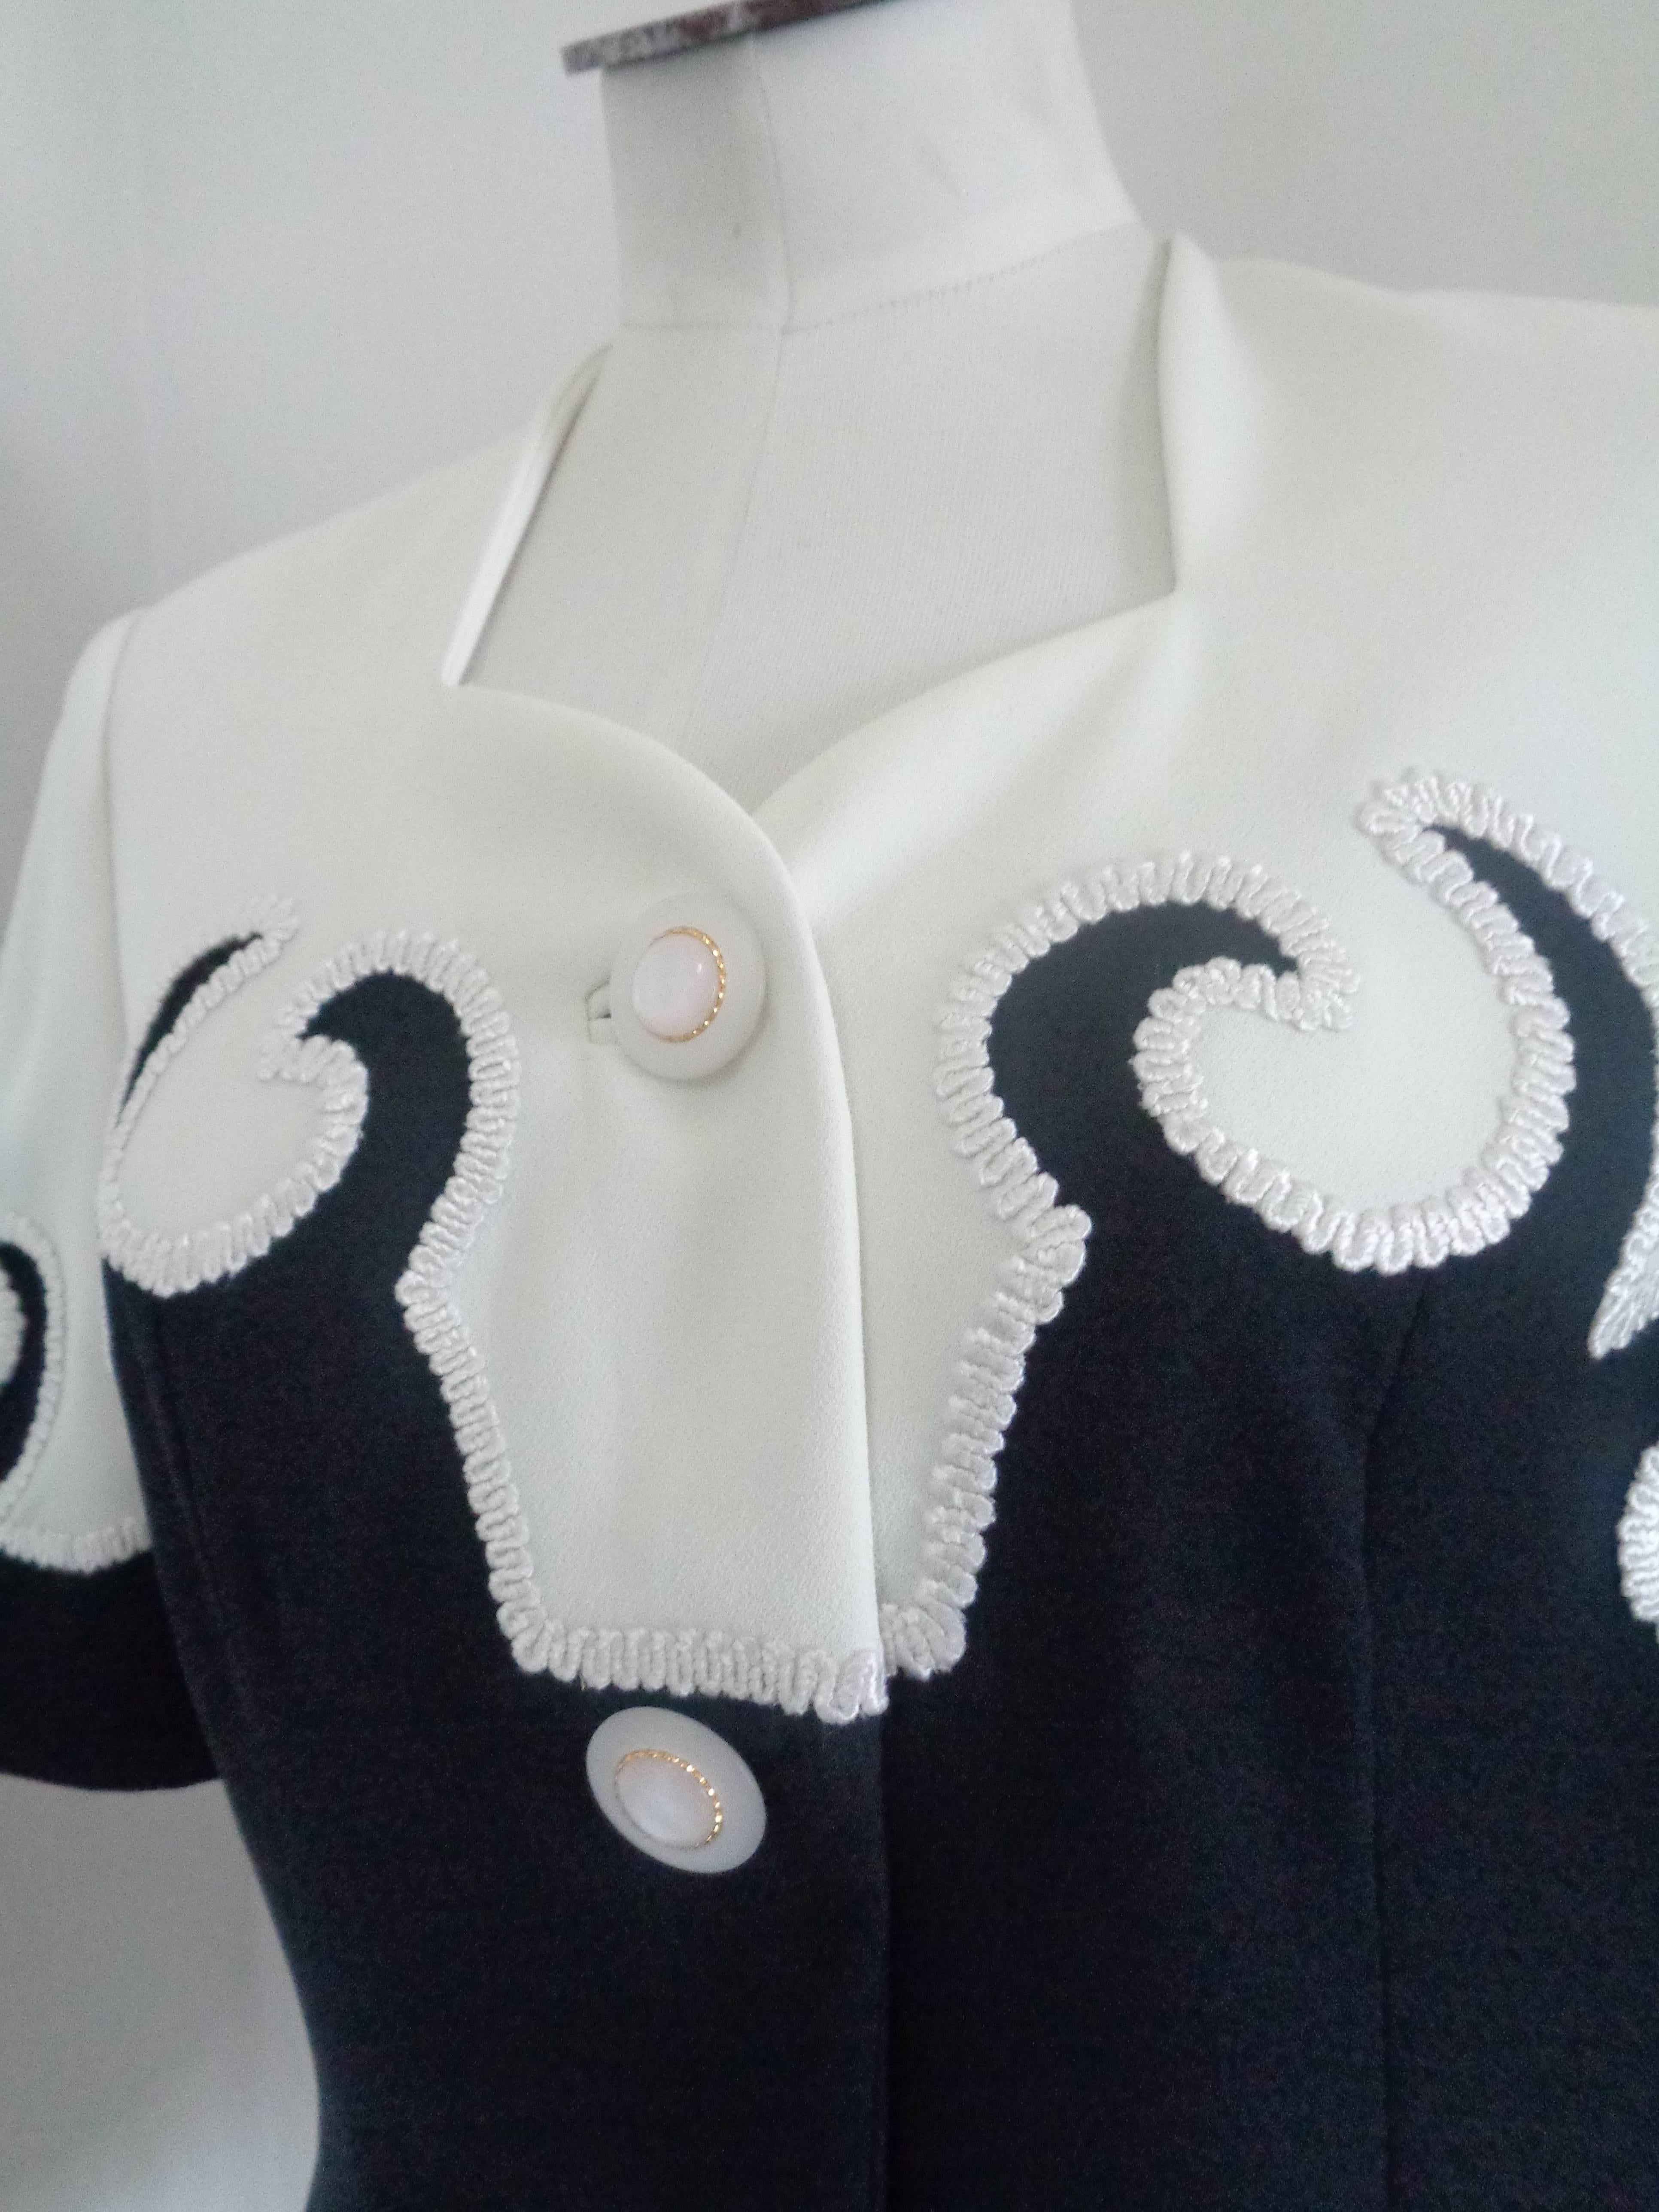 Nothà White and Black Jacket
Totally made in italy in size 46